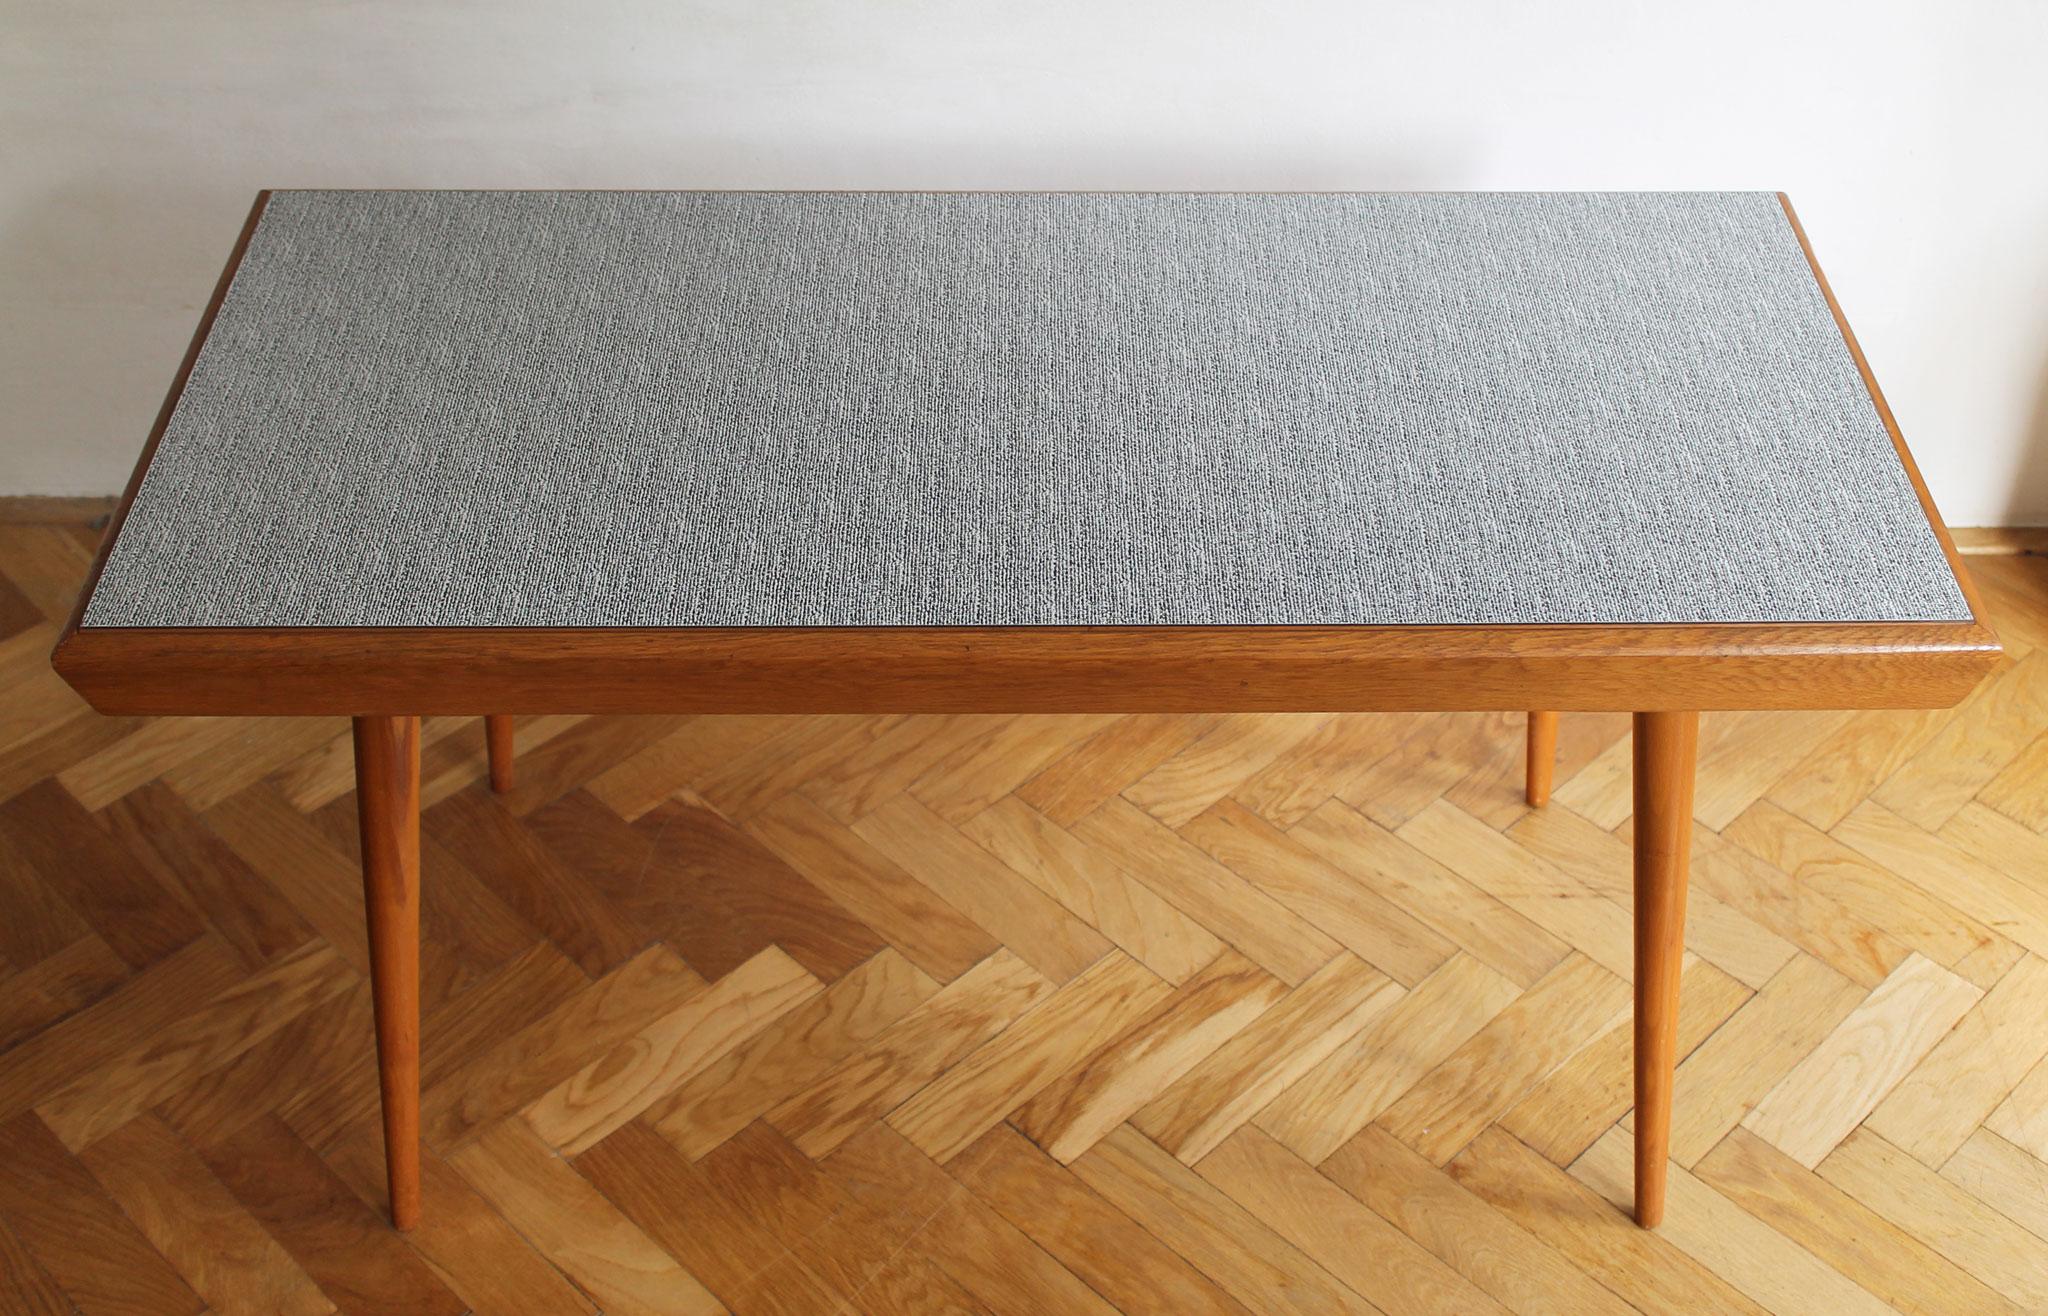 1960's Mid Century Modern Coffee table by Jiri Jiroutek for Interier Praha In Good Condition For Sale In Brno, CZ